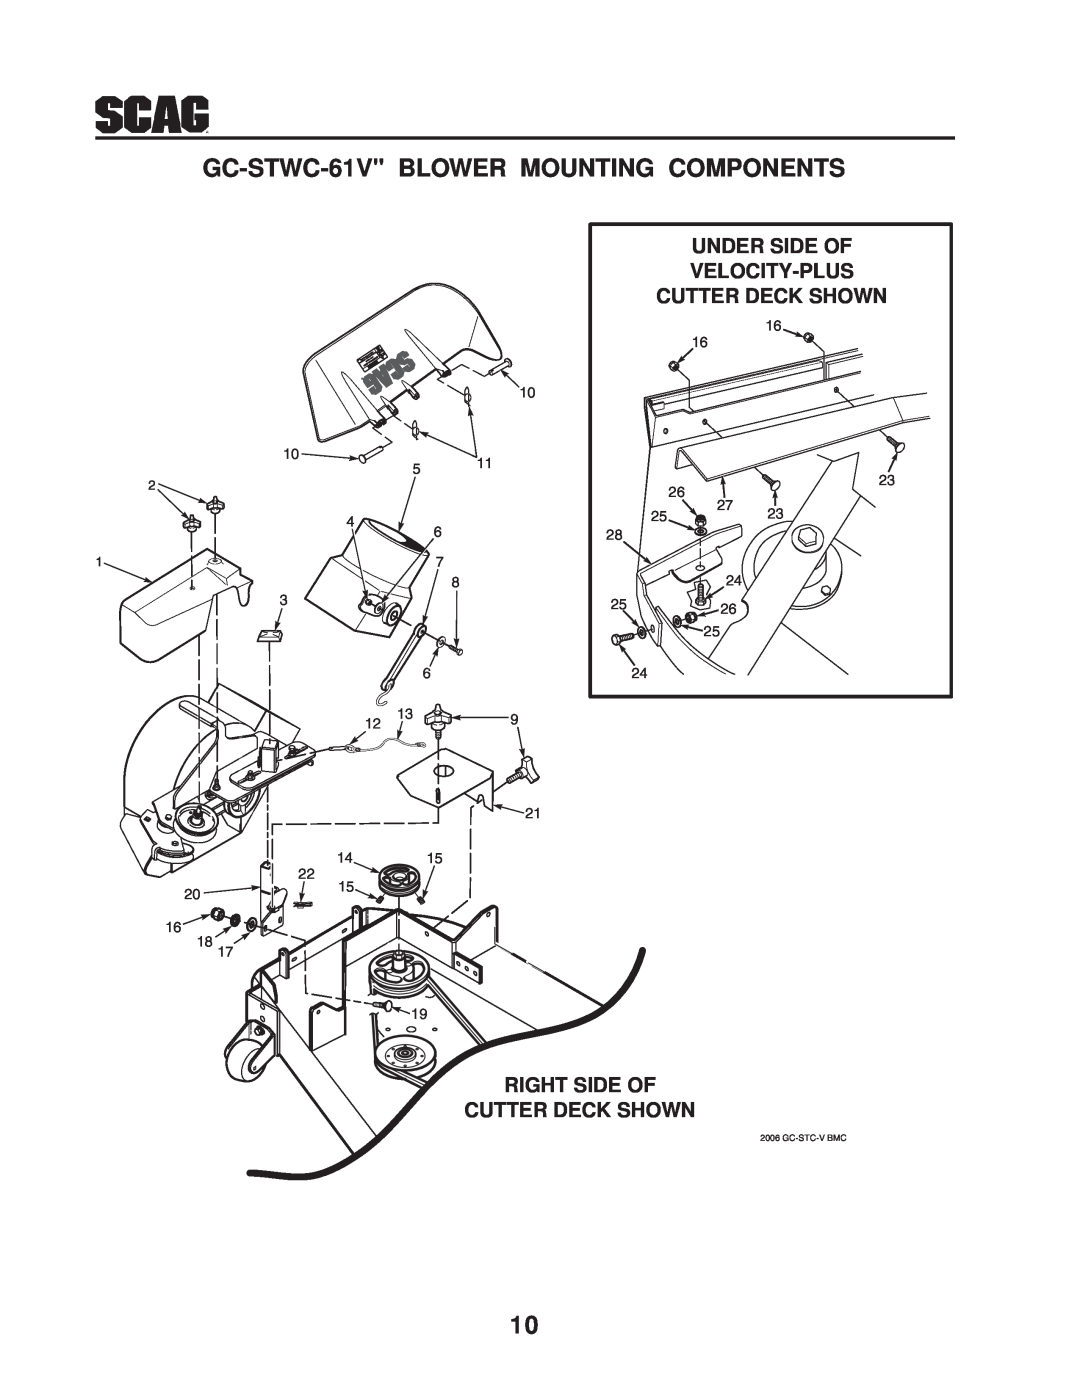 Scag Power Equipment GC-STWC-61V BLOWER MOUNTING COMPONENTS, Under Side Of, Velocity-Plus, Cutter Deck Shown 